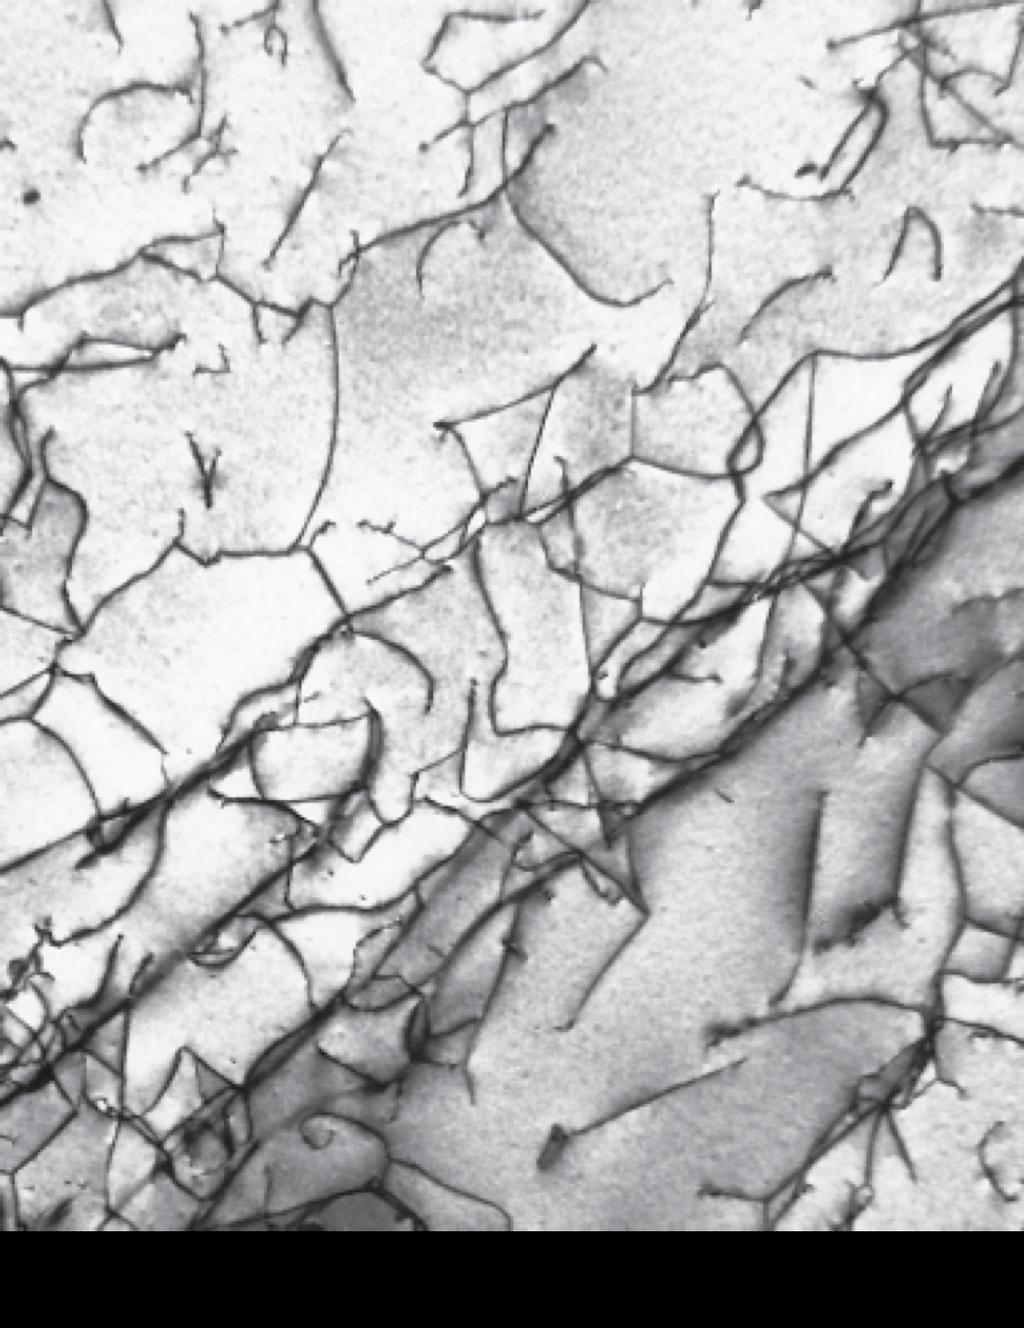 Imperfections in Solids 전위는 전자현미경(electron microscope)으로 관찰 가능. 아래 사진에서 검은 선 이 전위이다. Fig. 6.